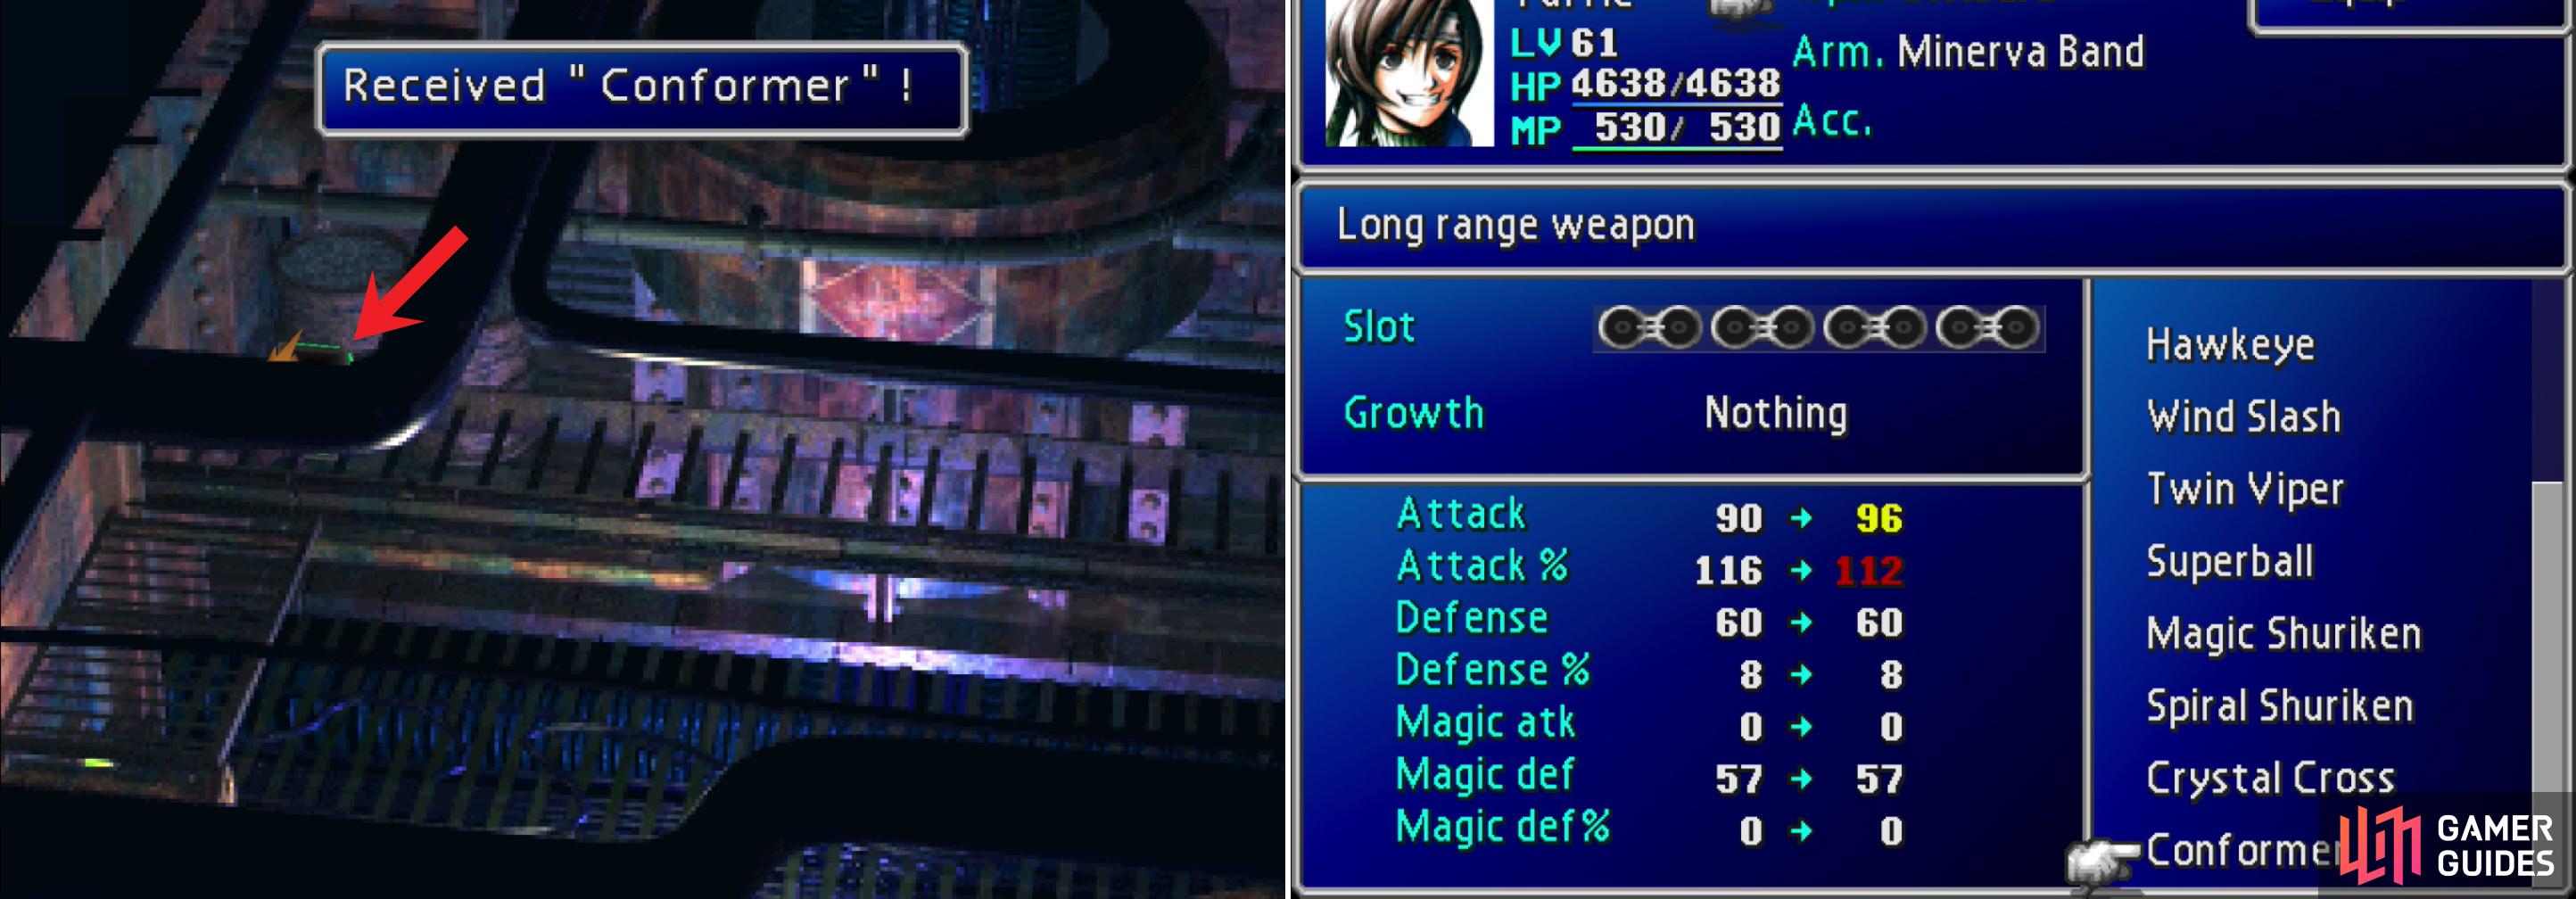 In a chest obscured by the foreground you’ll find Yuffie’s ultimate weapon, the Conformer (left). Not only is it Yuffie’s most powerful weapon, it’s also one of the strongest weapons in the game, thanks to how it charges (right).